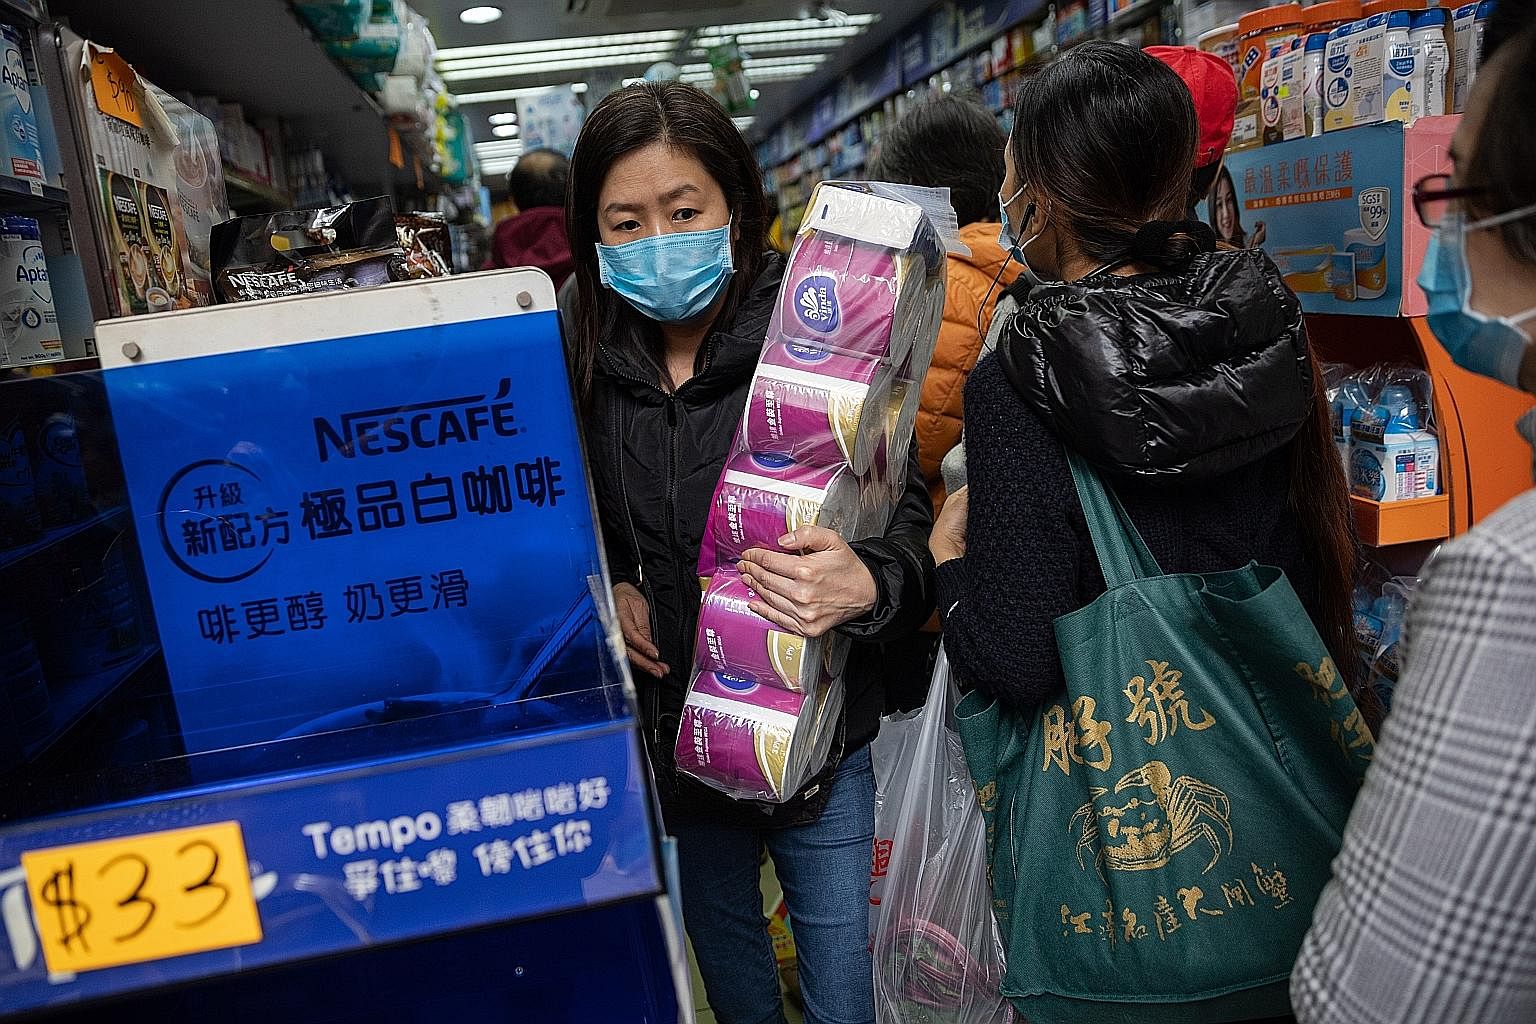 A shopper stocking up on toilet paper at a drugstore in Hong Kong. Threats that feel out of control, like a runaway illness outbreak, lead people to seek ways to re-impose control, for instance by hoarding supplies.